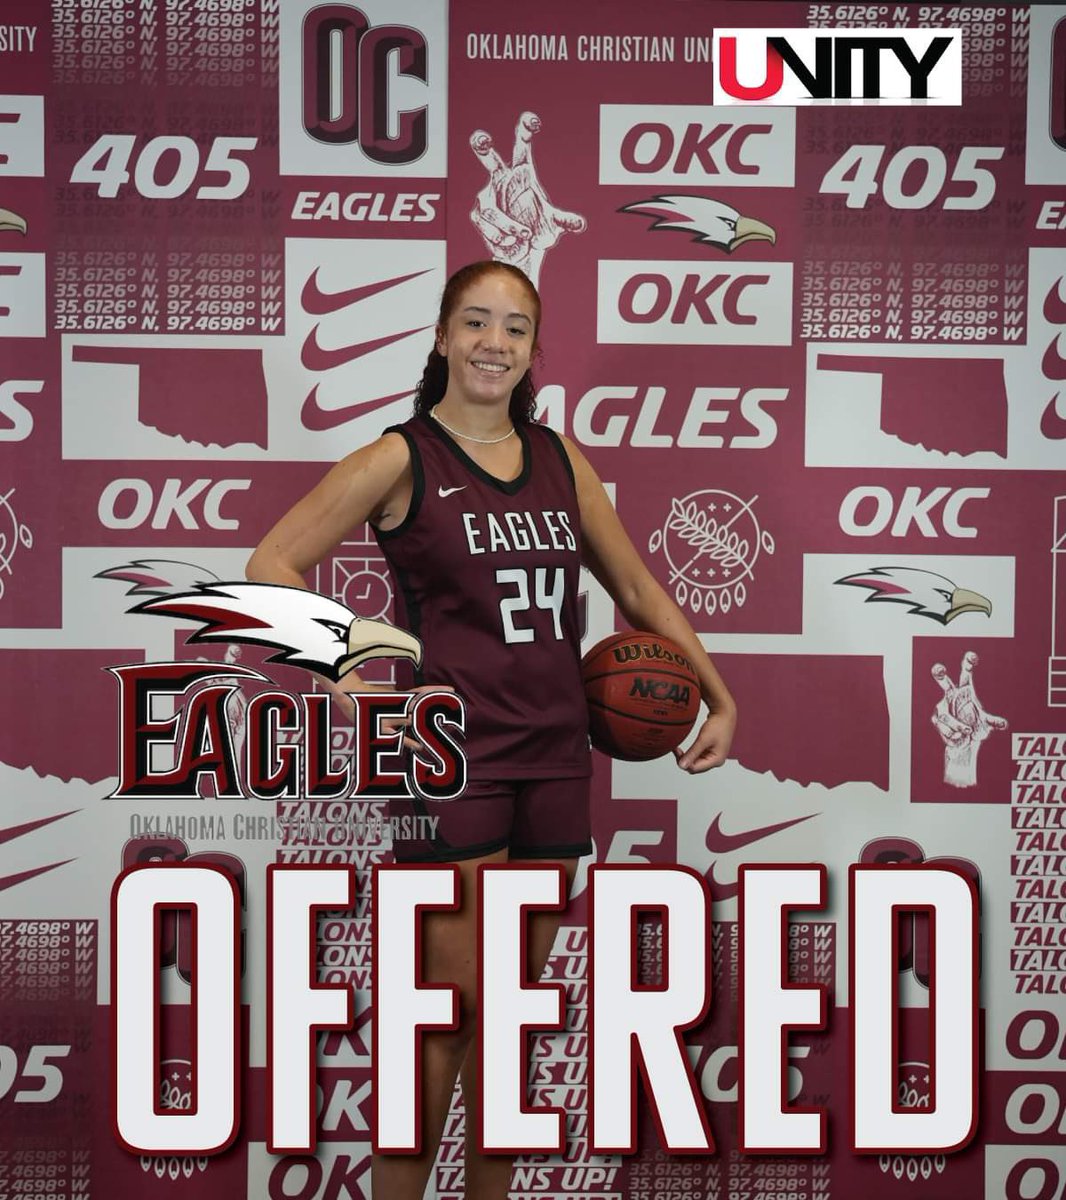 After a great unofficial visit, I’m blessed to have received an offer from @OC_WBB! Thank you for believing in me! ❤️ @CoachMRB4 @CoachCG_OC @CoachKat_OC @unitybasketbal1 @Ajhawkinsbasket